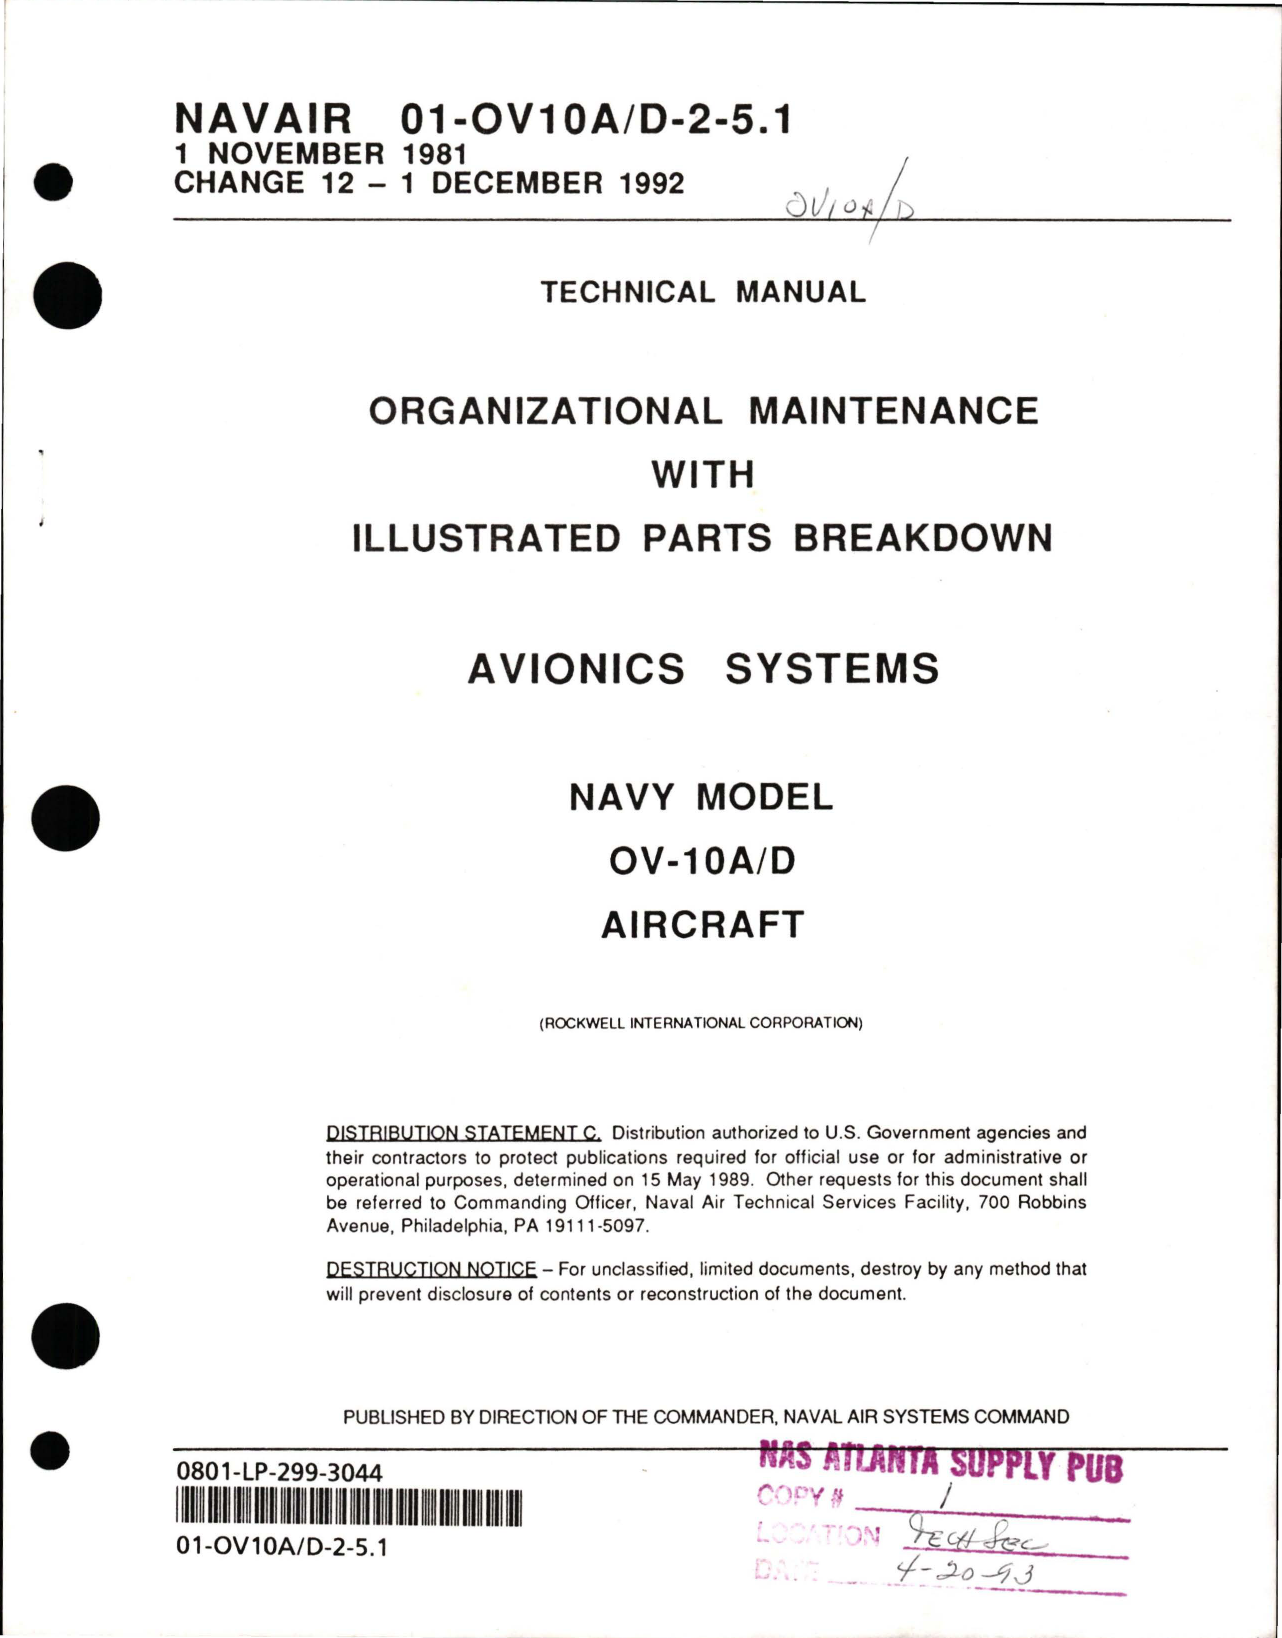 Sample page 1 from AirCorps Library document: Organizational Maintenance with Illustrated Parts Breakdown for Avionics Systems for OV-10A-D 